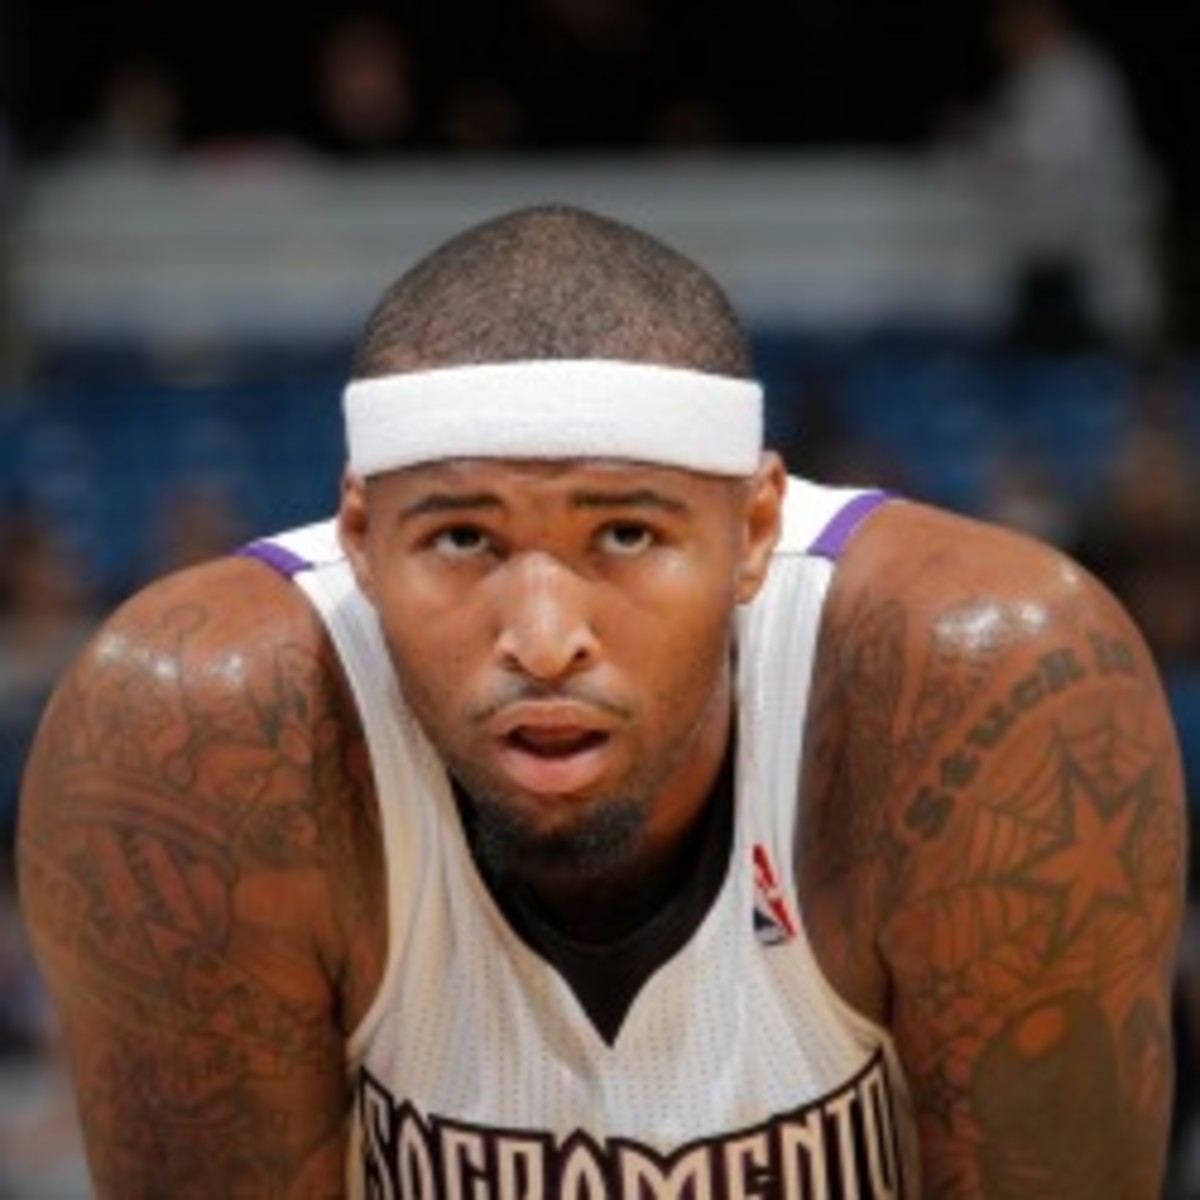 Kings center DeMarcus Cousins has shot under 42 percent from the floor this season. (Rocky Widner/Getty Images)